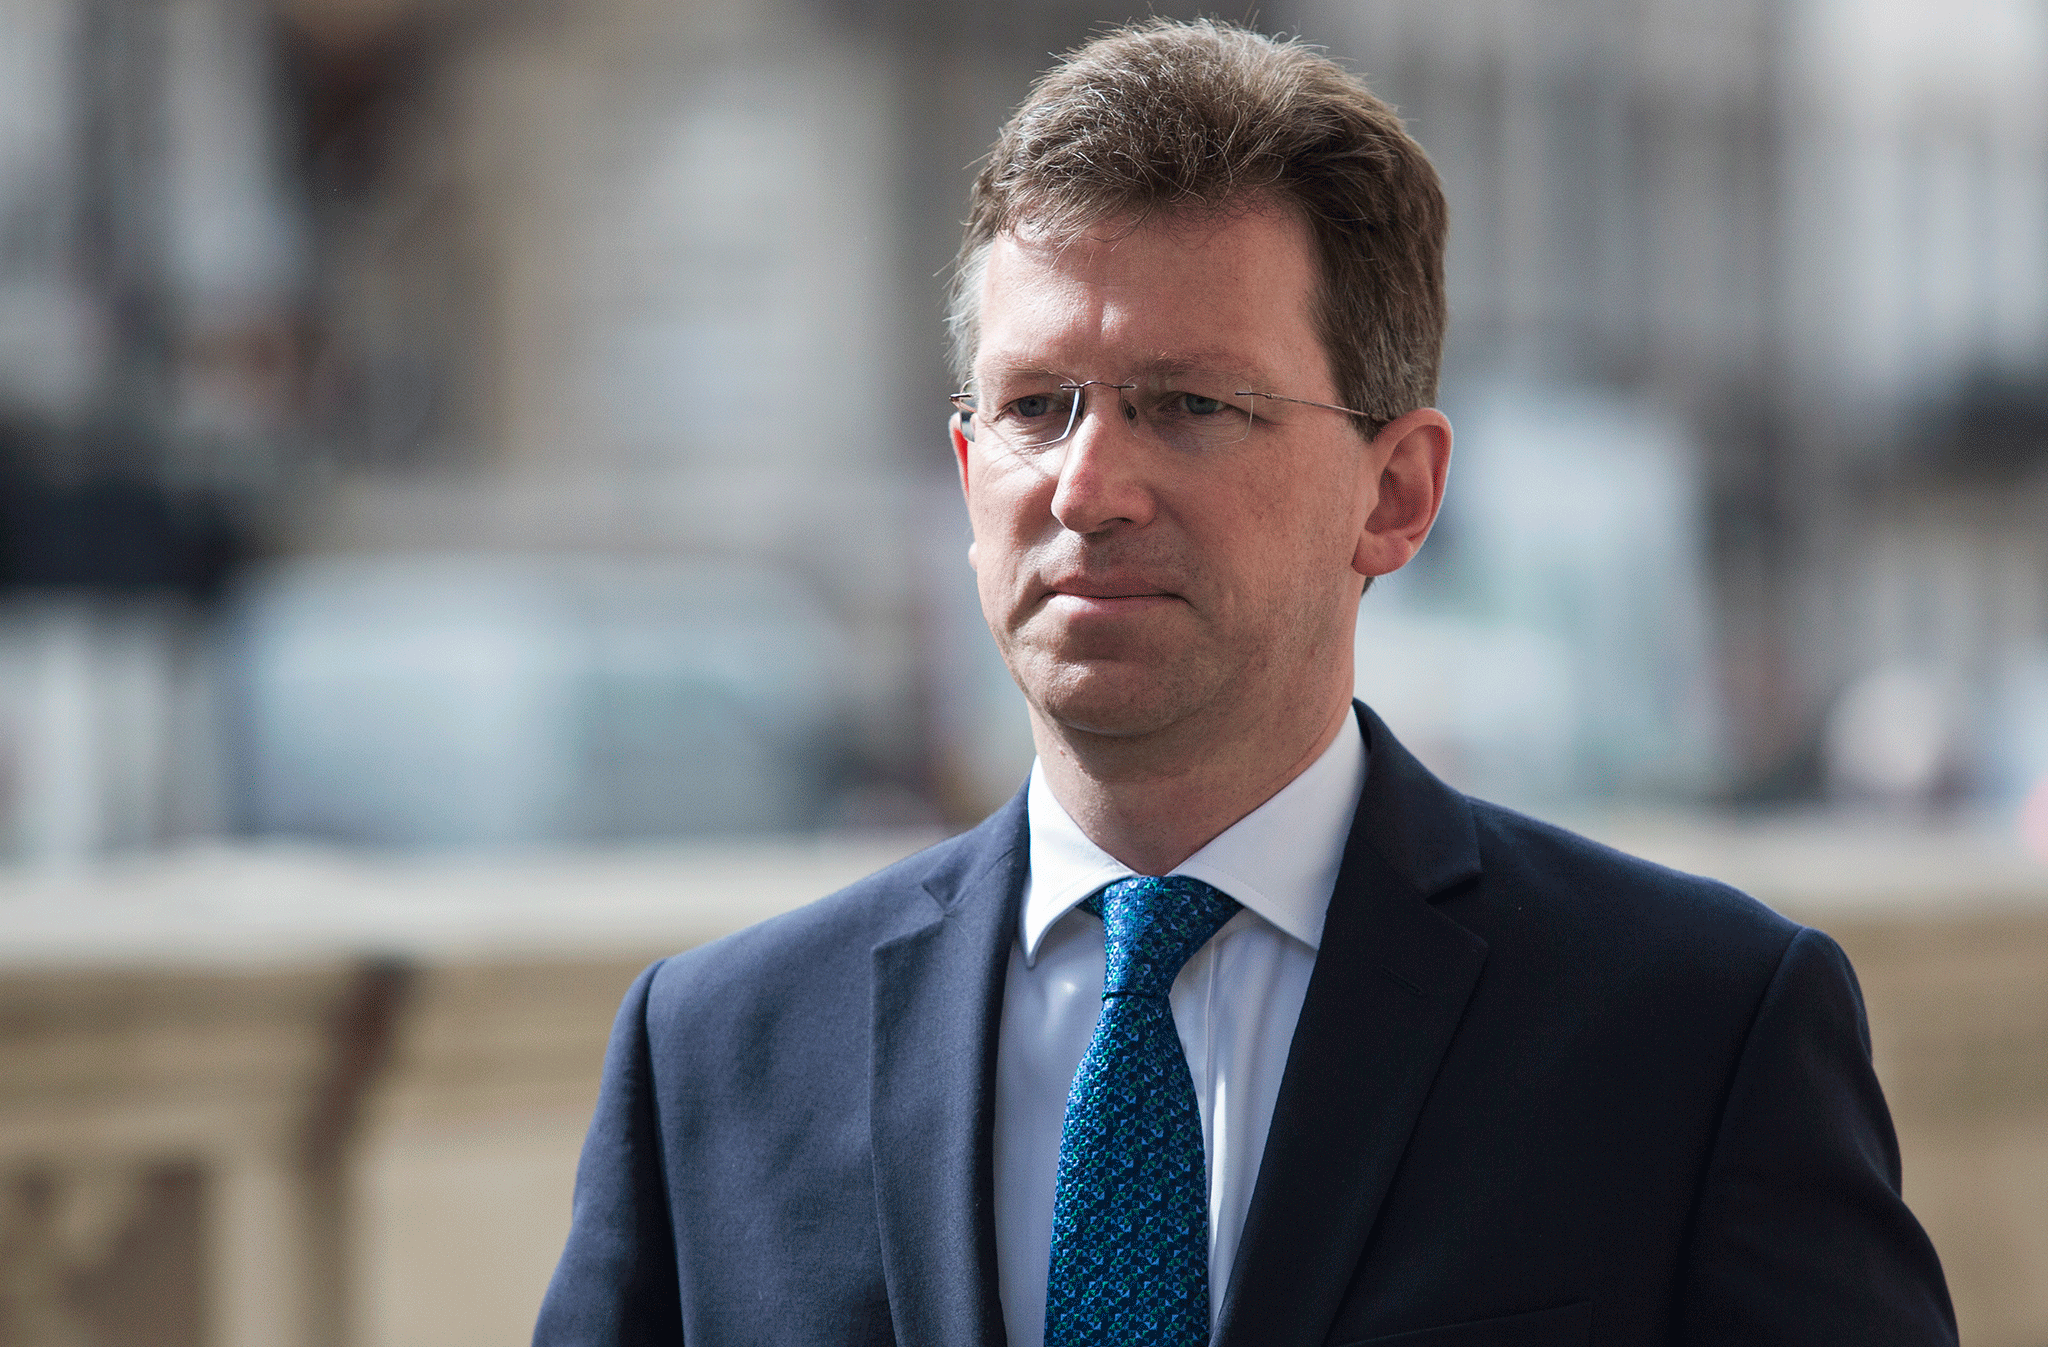 Jeremy Wright, the Attorney General has announced the Government will look into extending the range for offences for corporate fraud and money laundering